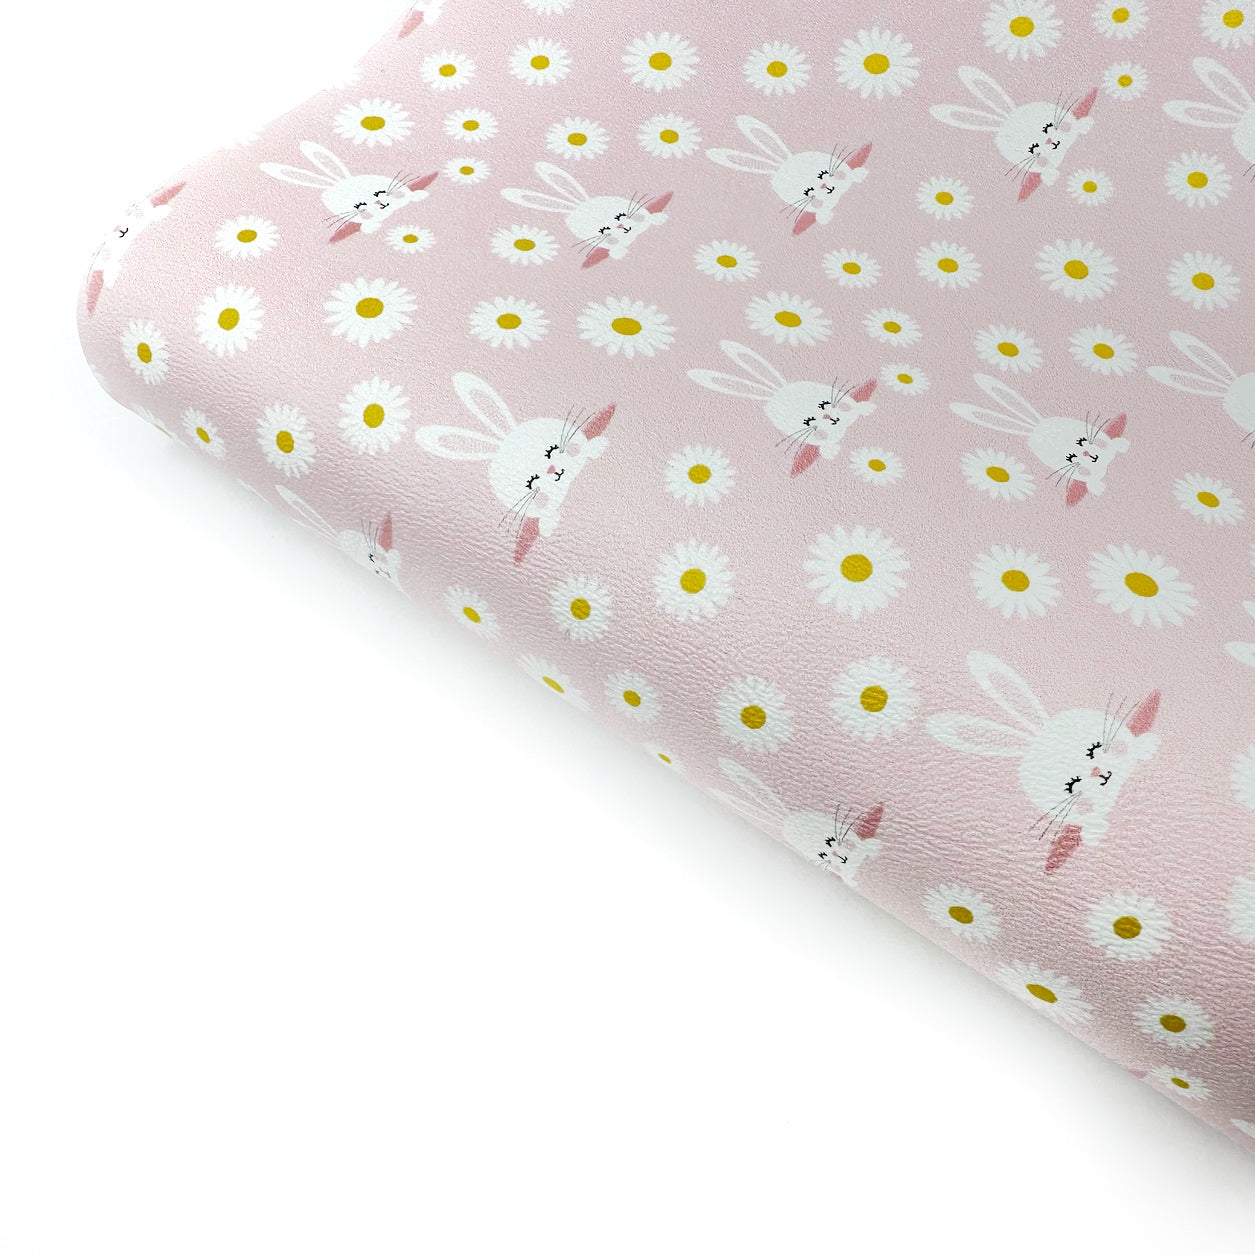 Little Daisy Bunny Premium Faux Leather Fabric Sheets